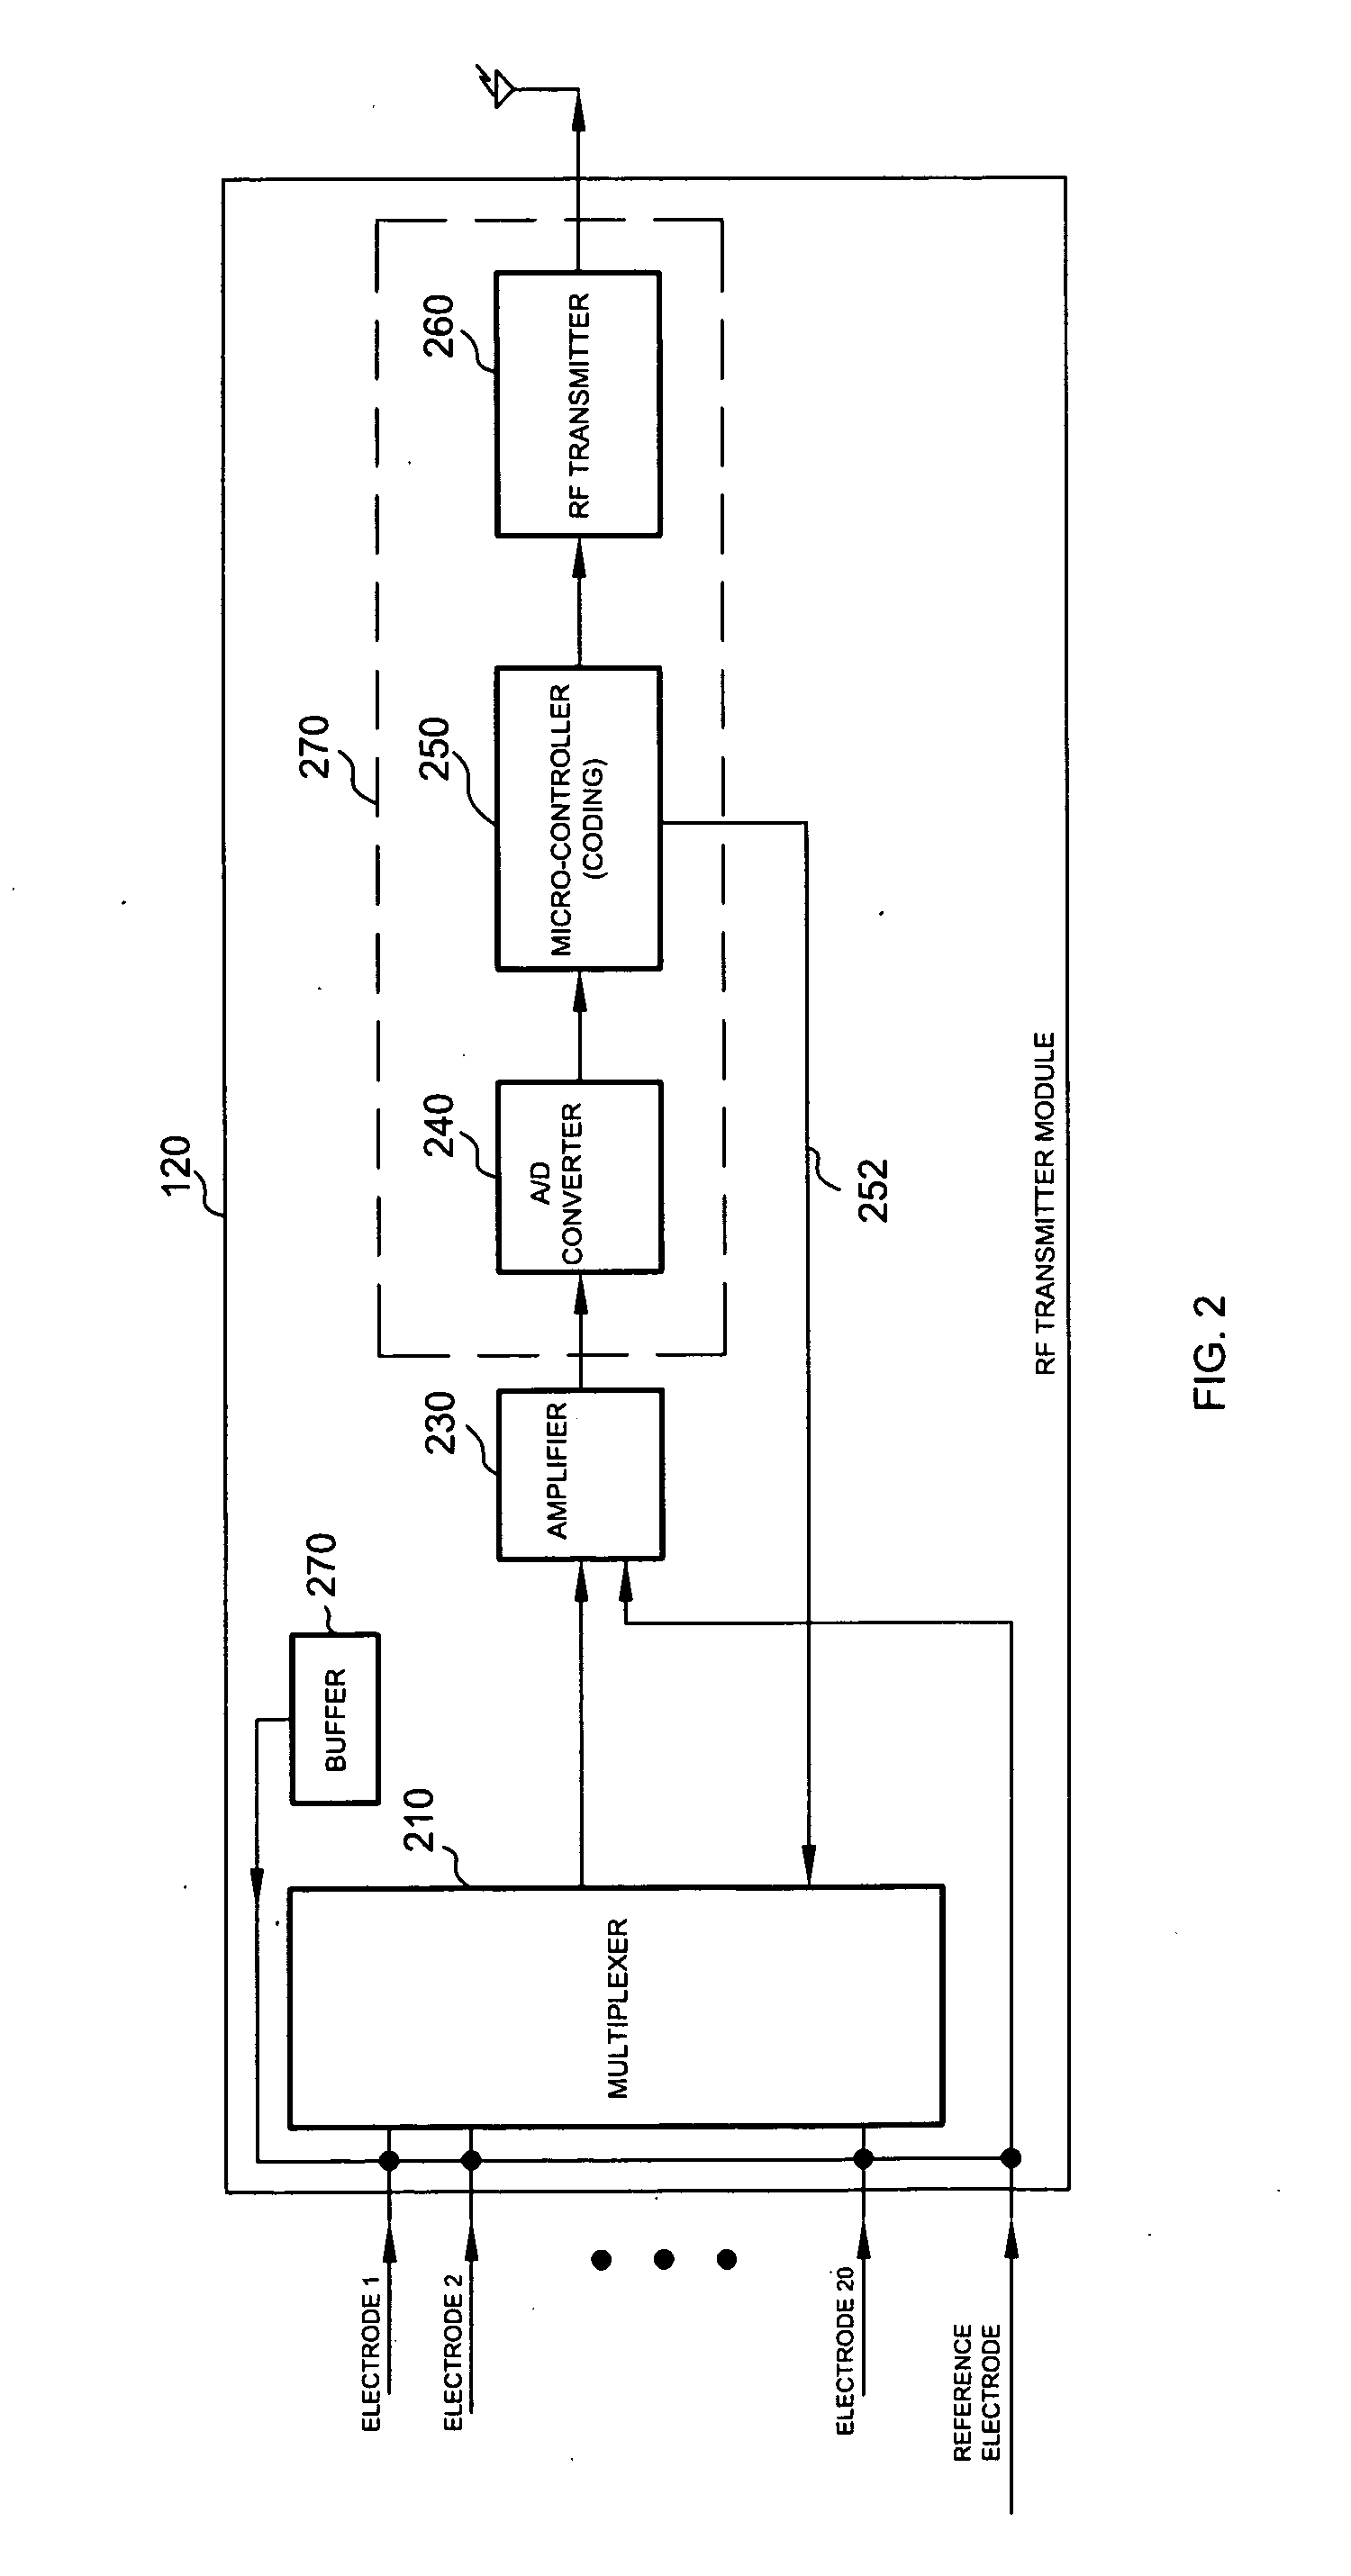 Catheter radio frequency adapter for wireless communication